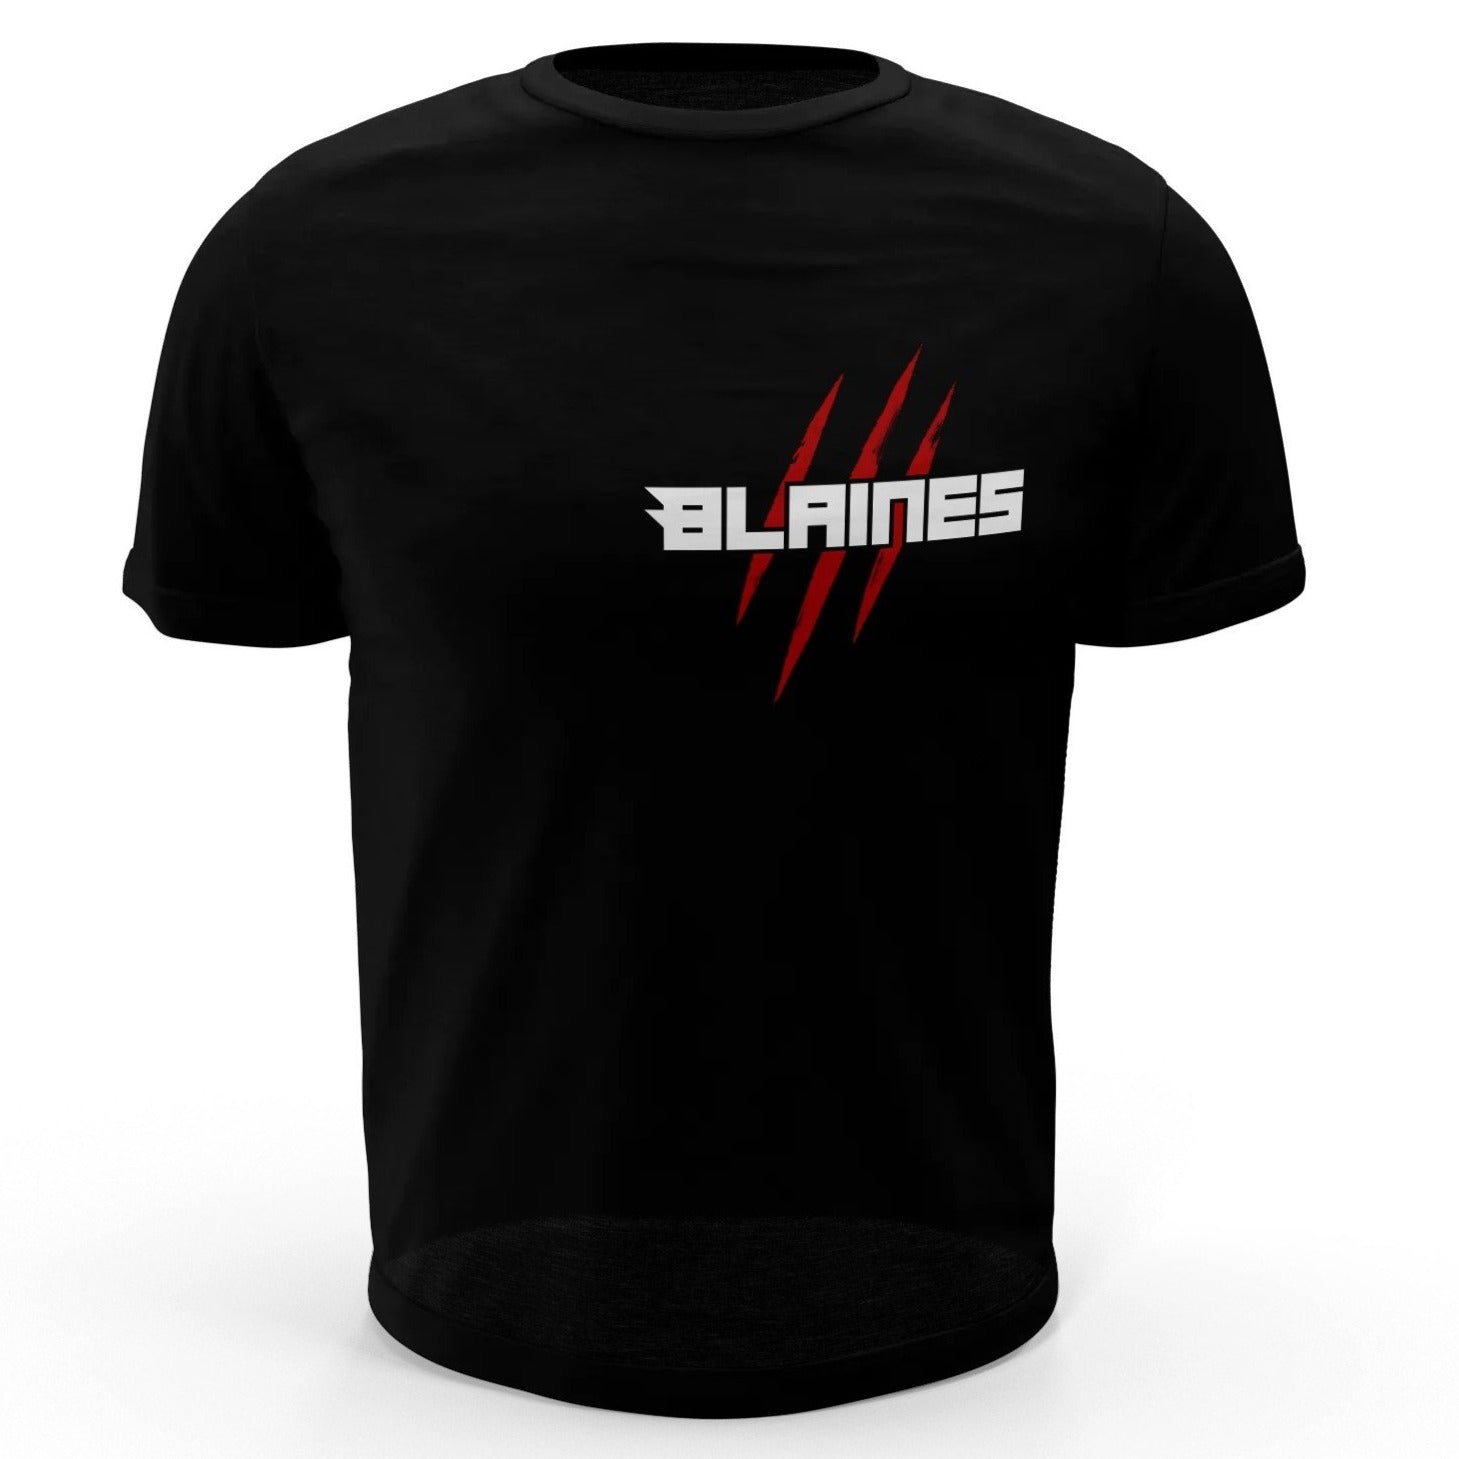 Blanes Ninja Unisex Shirt - Asian Style Clothing - Japanese Street Fashion - Unisex for Men and Women - Stretchable and Breezy 4XL